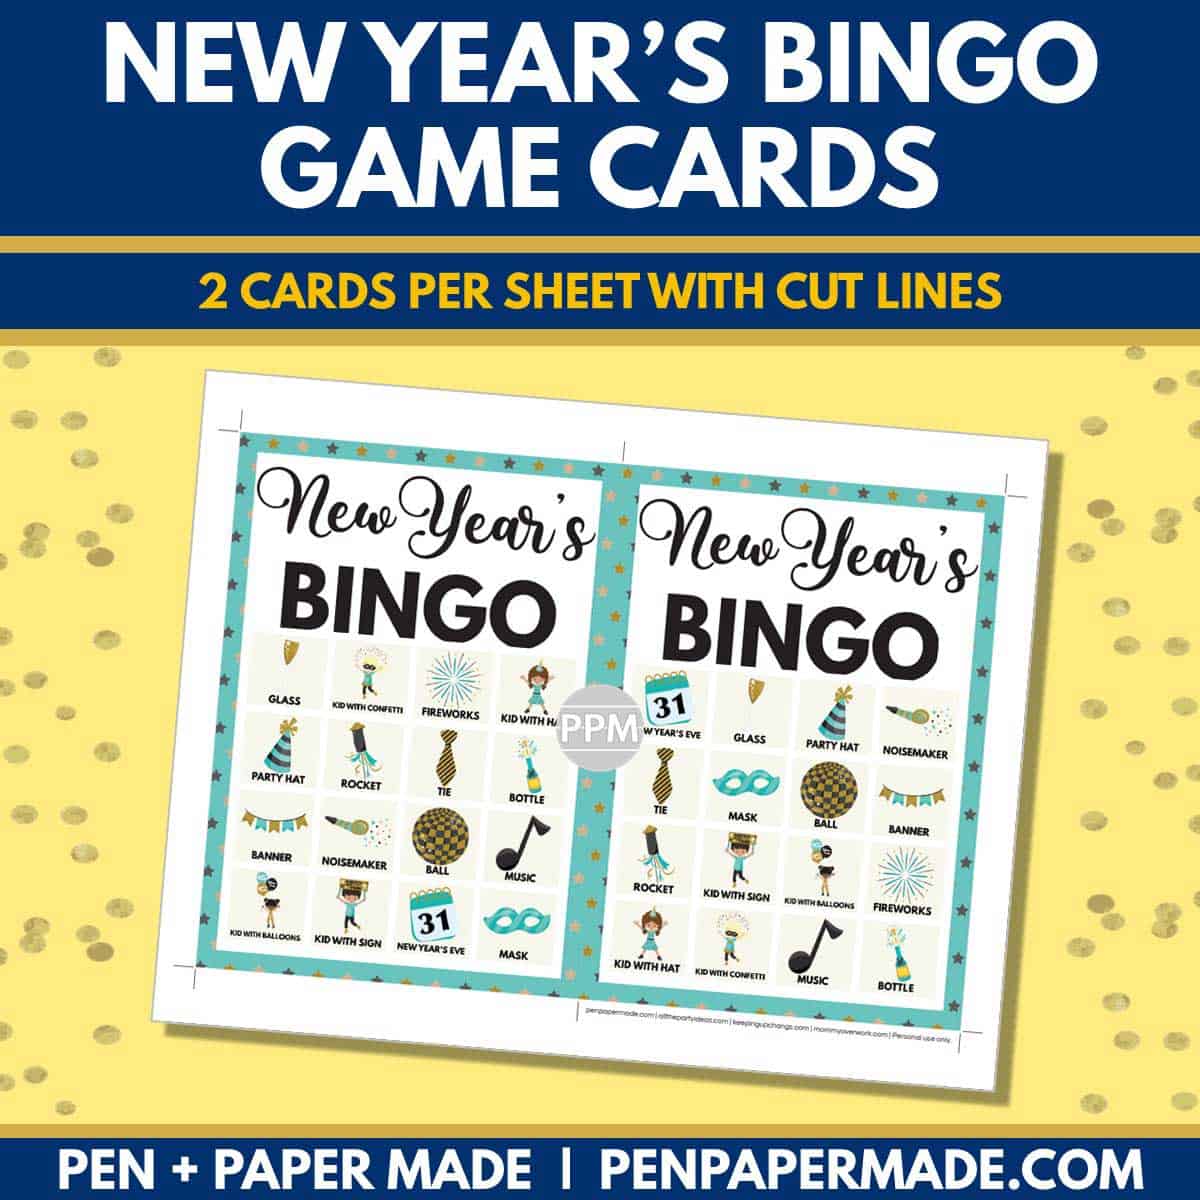 new year's day bingo card 4x4 5x7 game boards with images and text words.